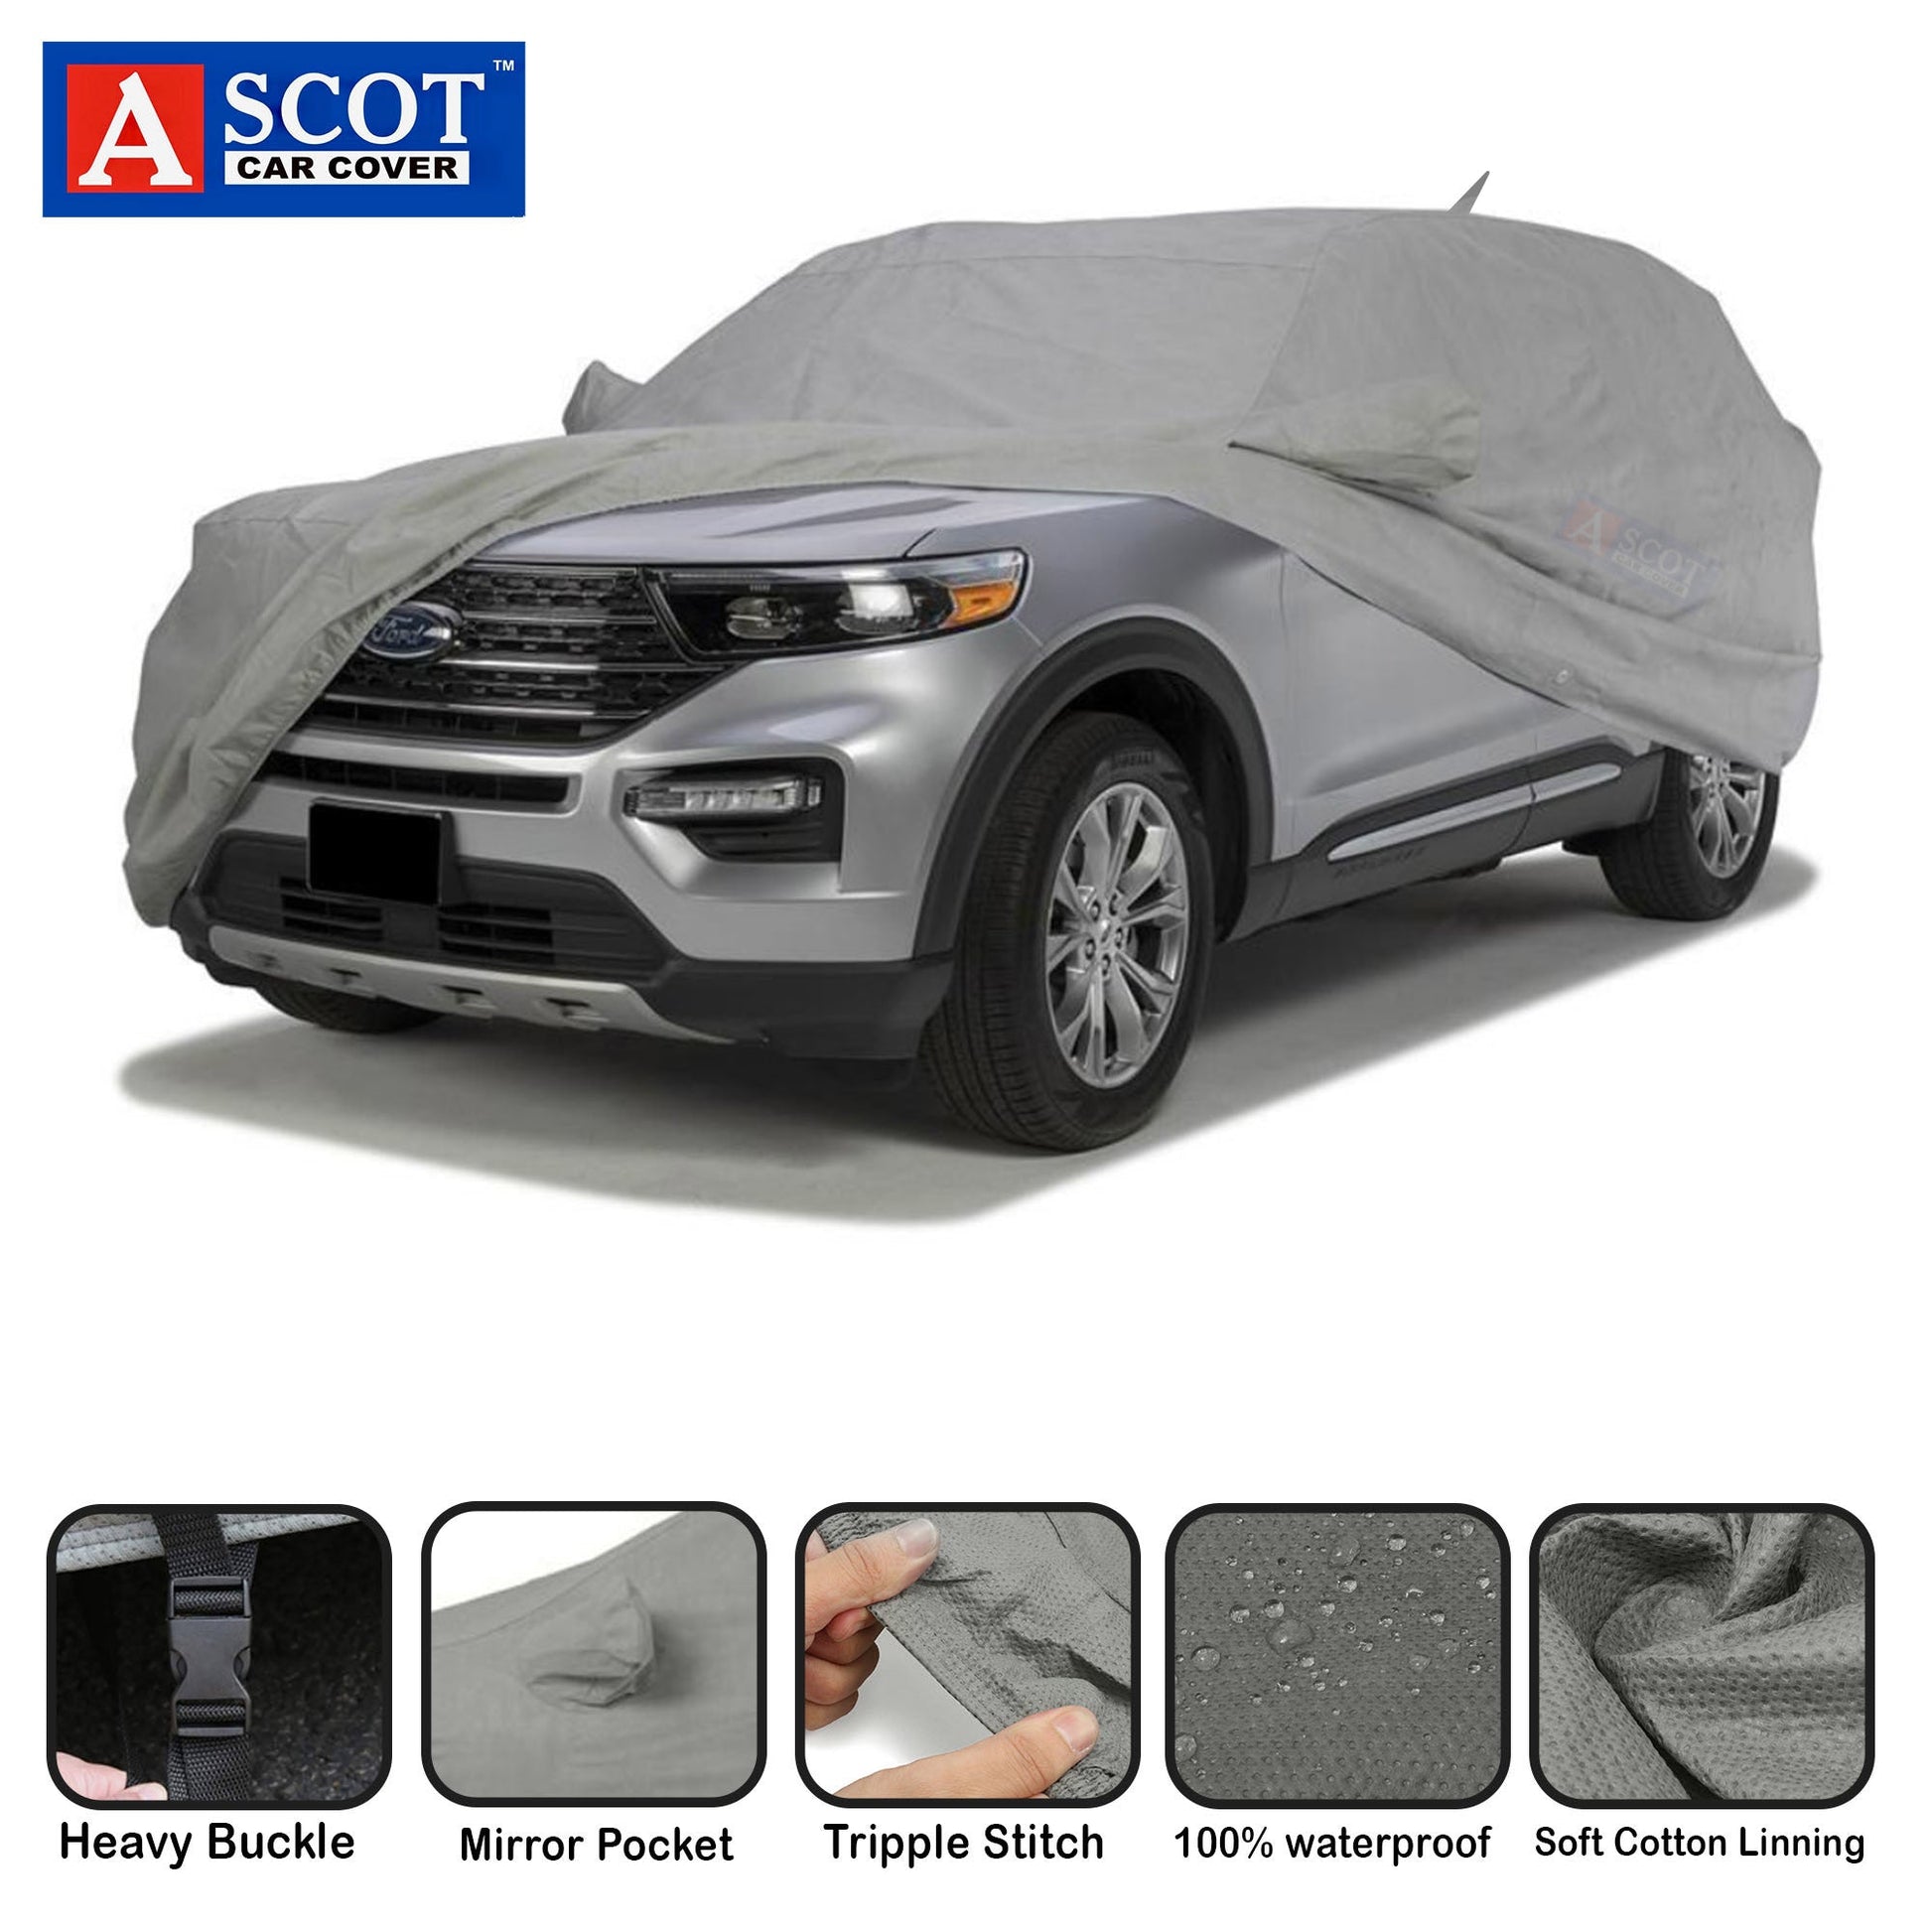 Buy Ford Car Covers Online